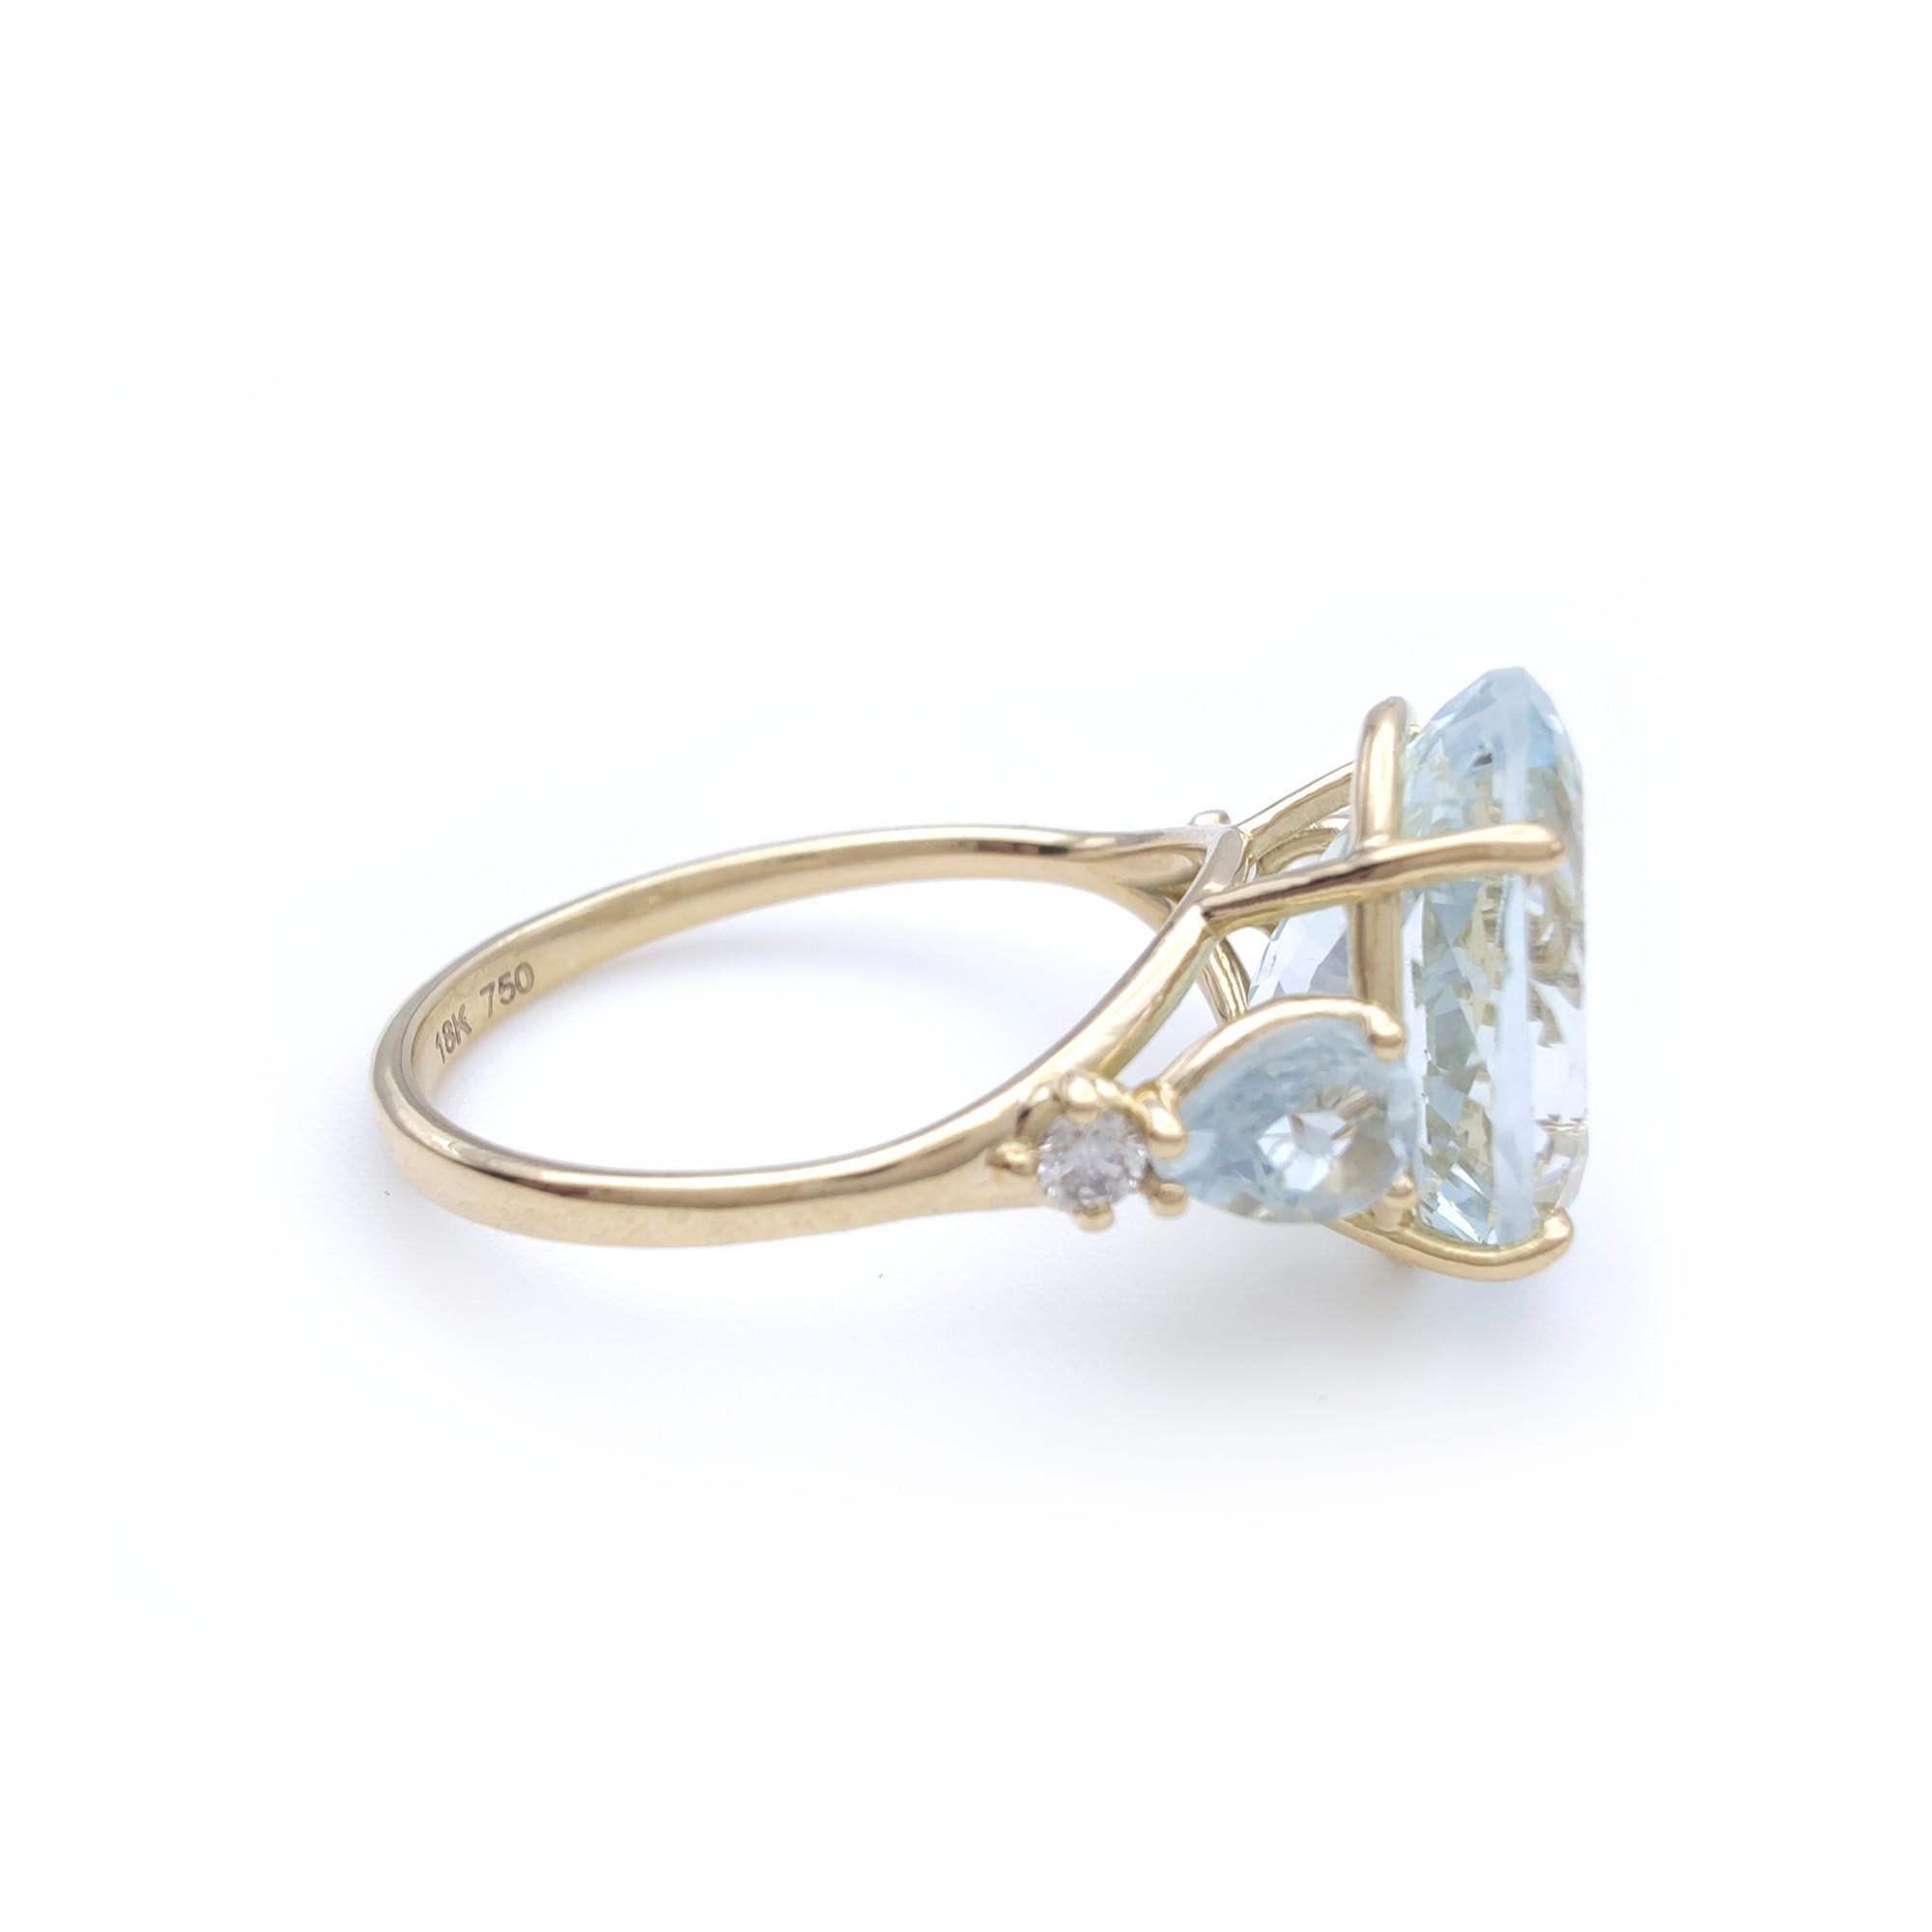 4.3ct  Oval Cut  Aquamarine  Ring, 18k Yellow Gold, with diamonds  For Sale 5